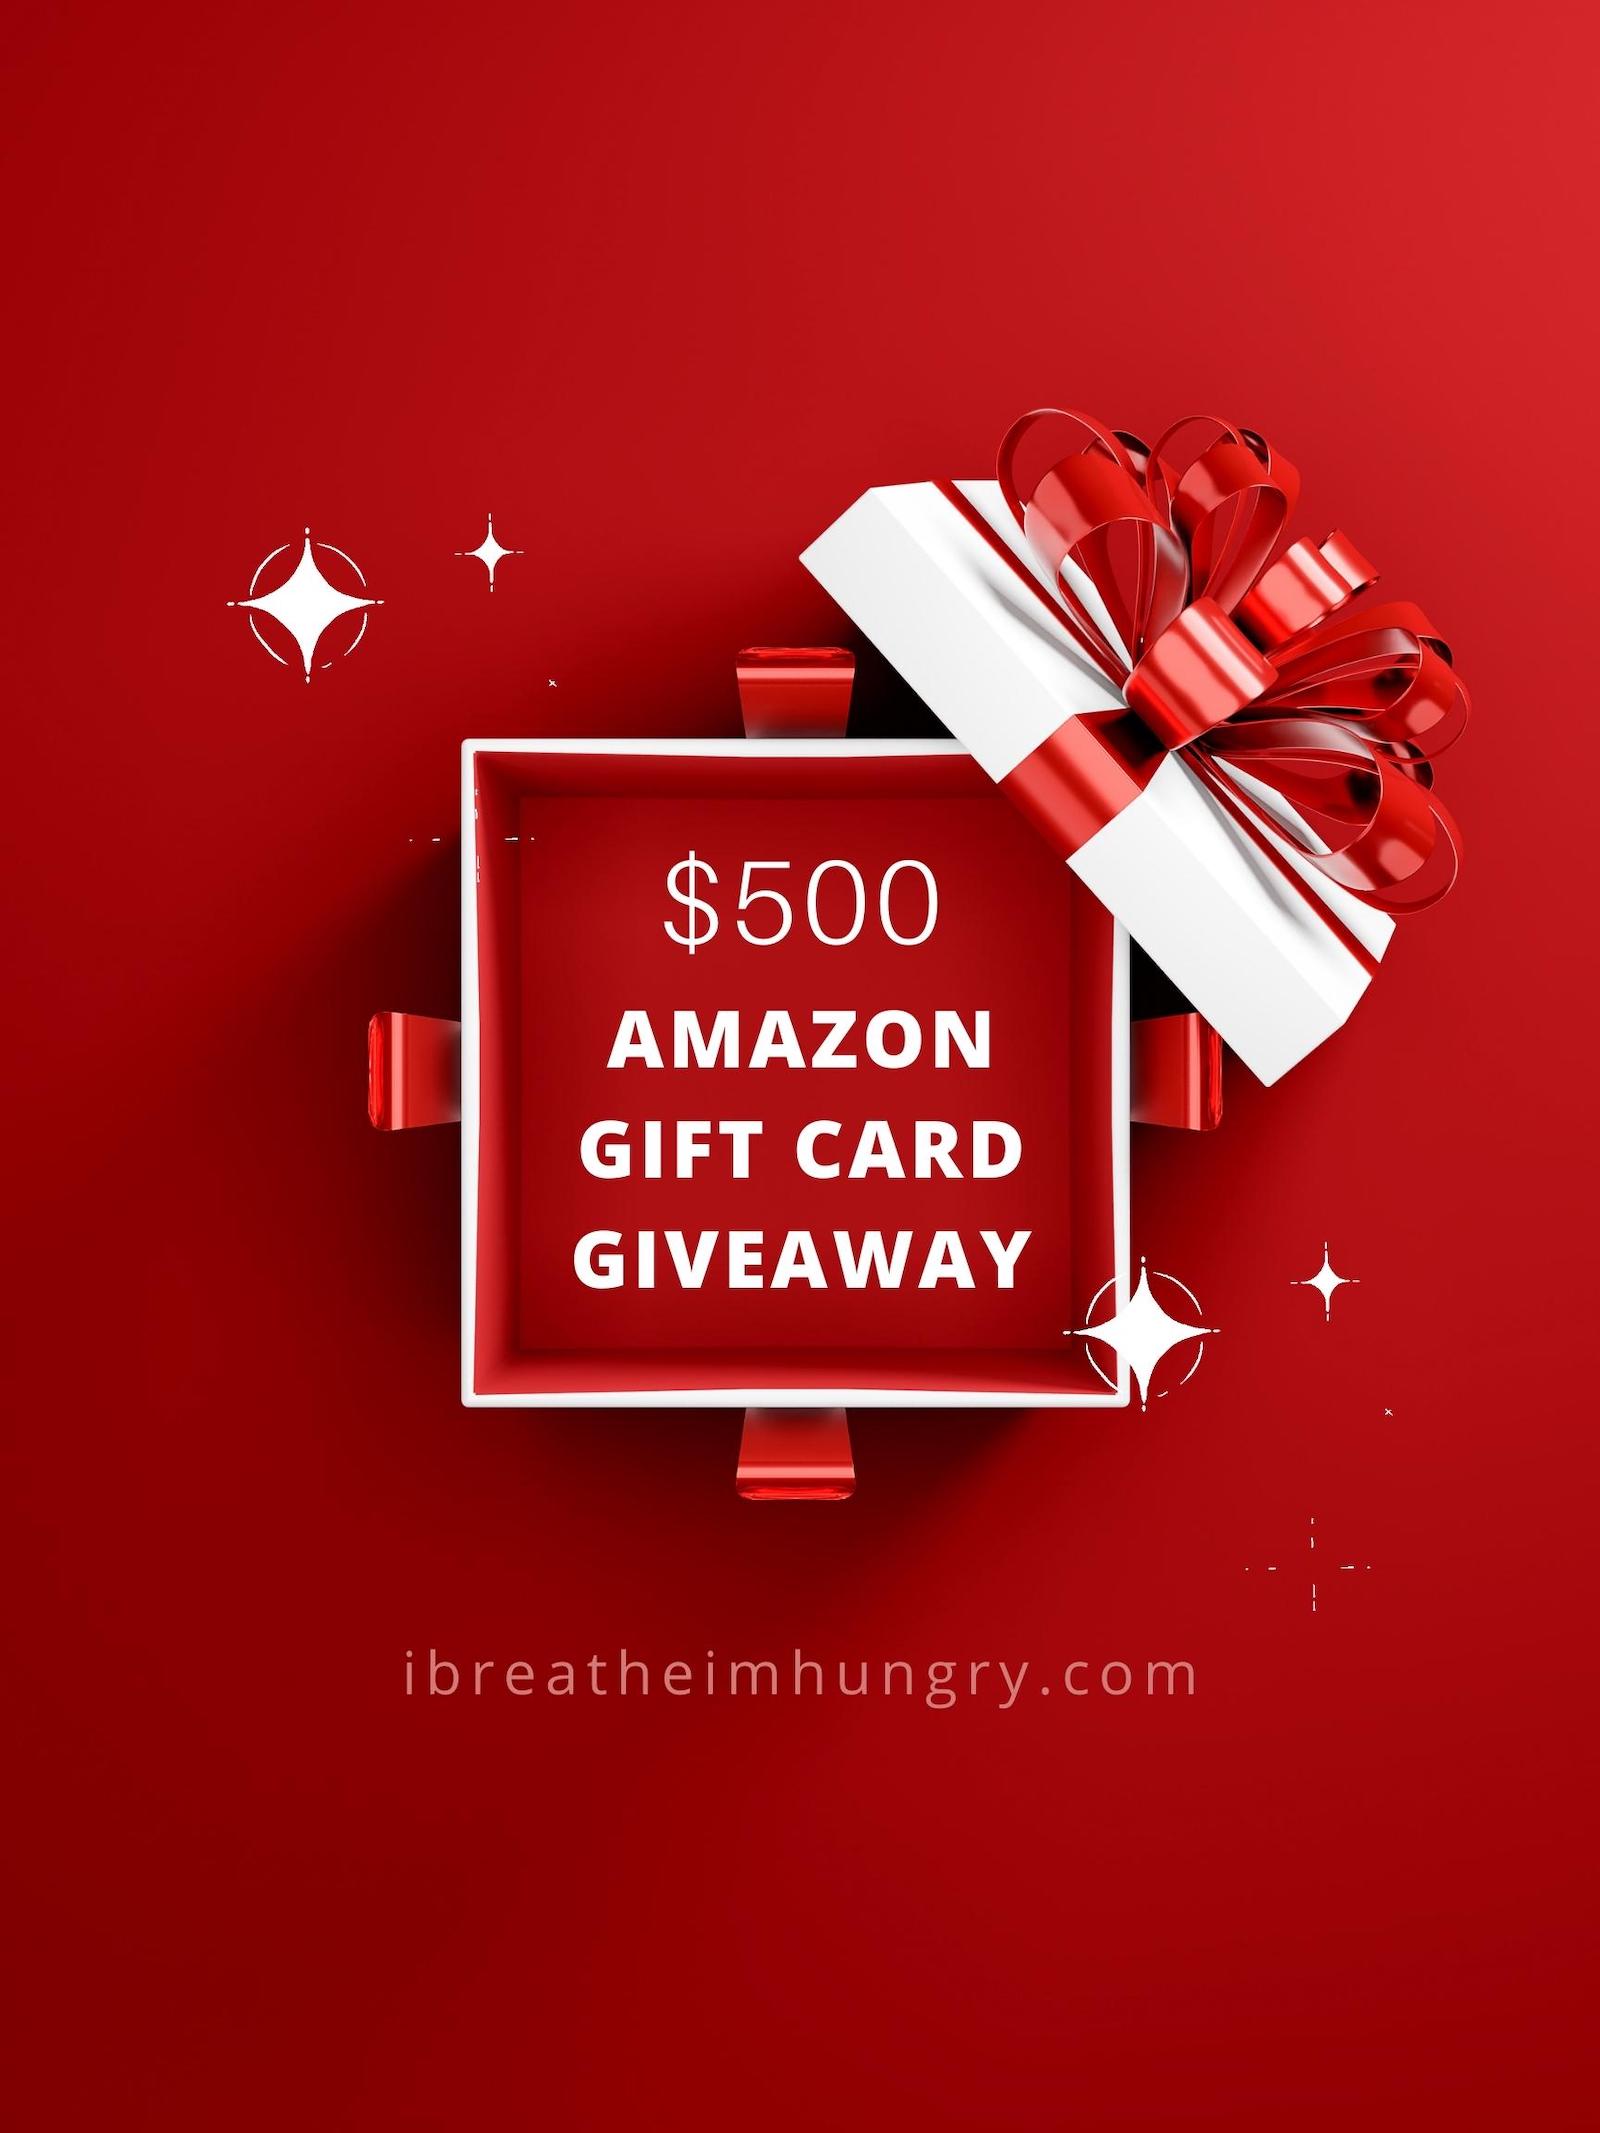 $500 amazon gift card giveaway poster from I breathe I'm hungry